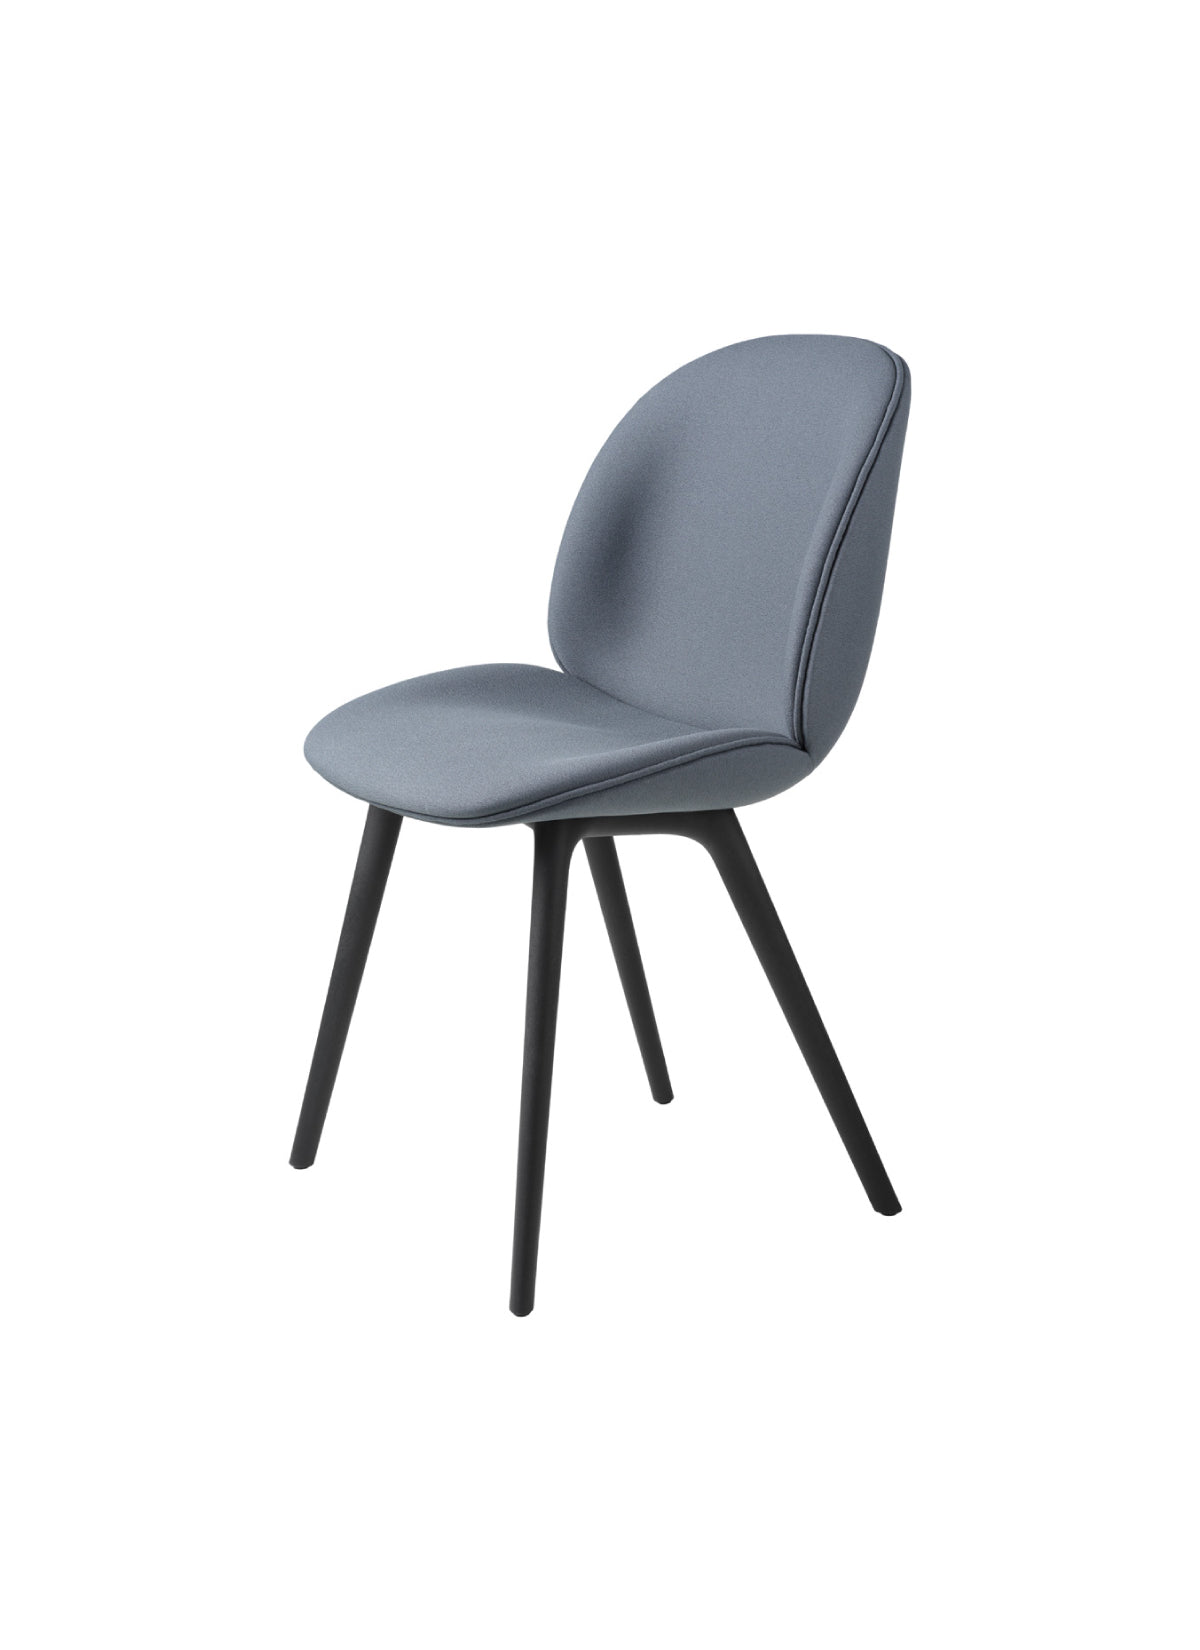 Beetle Dining Chair - Fully Upholstered - Plastic Base by Gubi